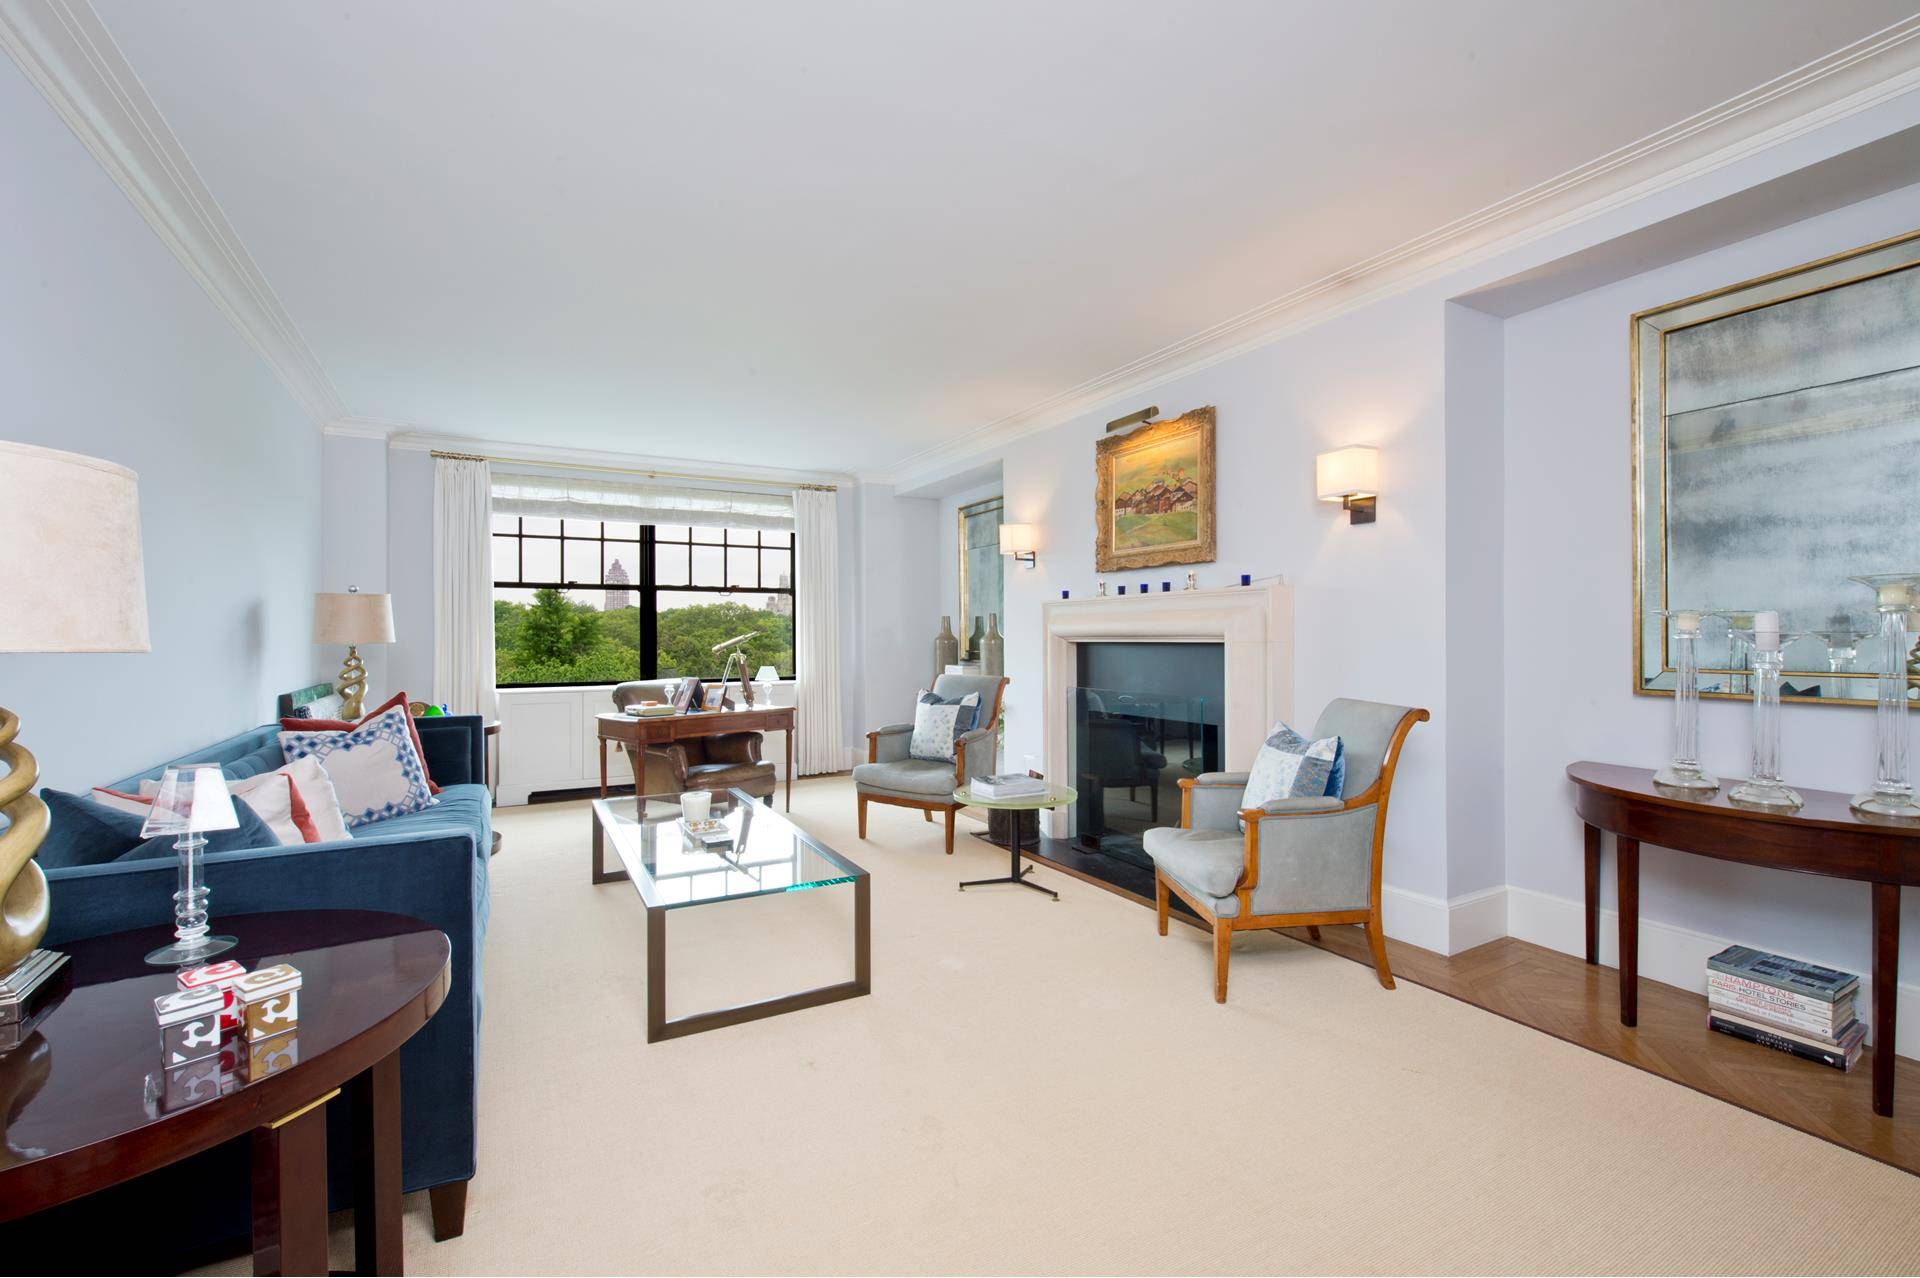 Rare opportunity to combine two apartments in order to create an expansive 12 room home with sweeping Central Park views from 11 windows.